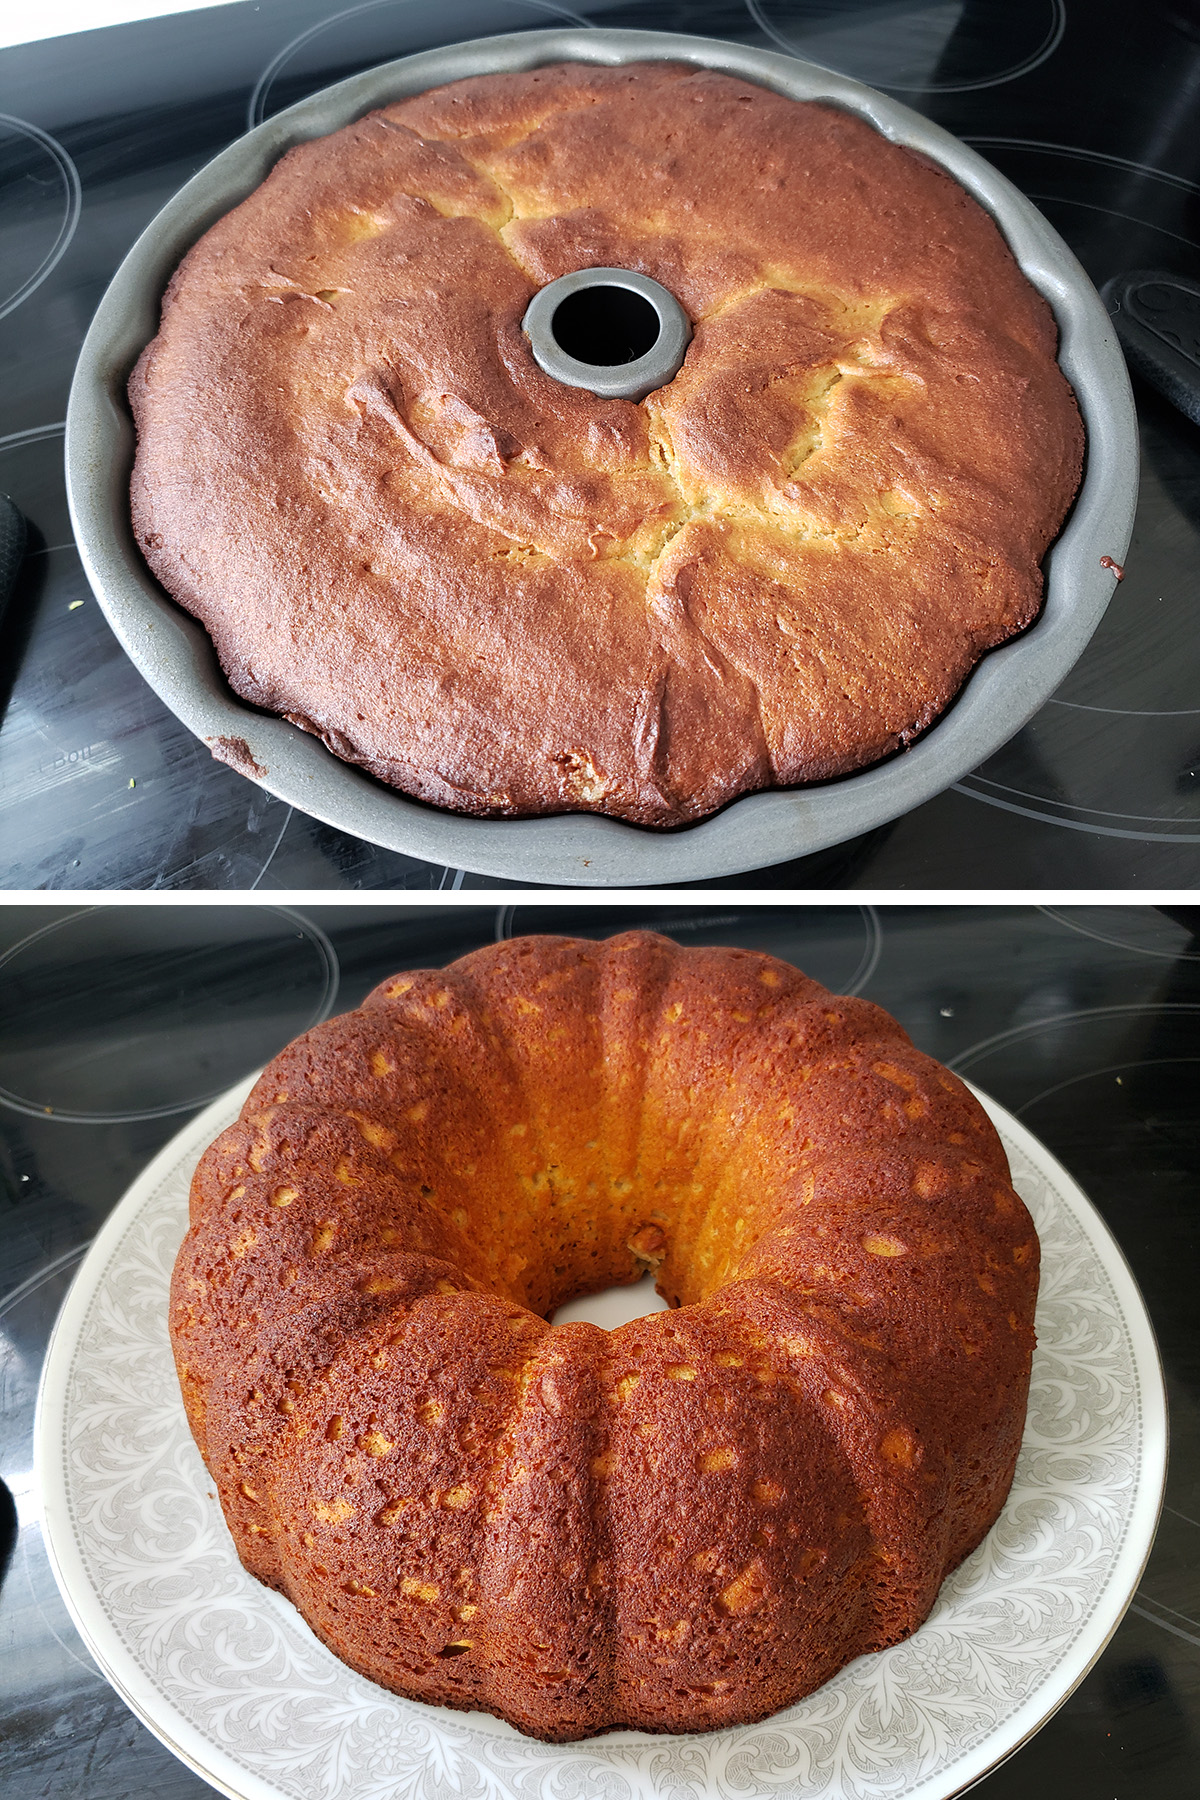 A two part compilation image showing the baked paska in the pan, and then after being turned out on the serving plate.